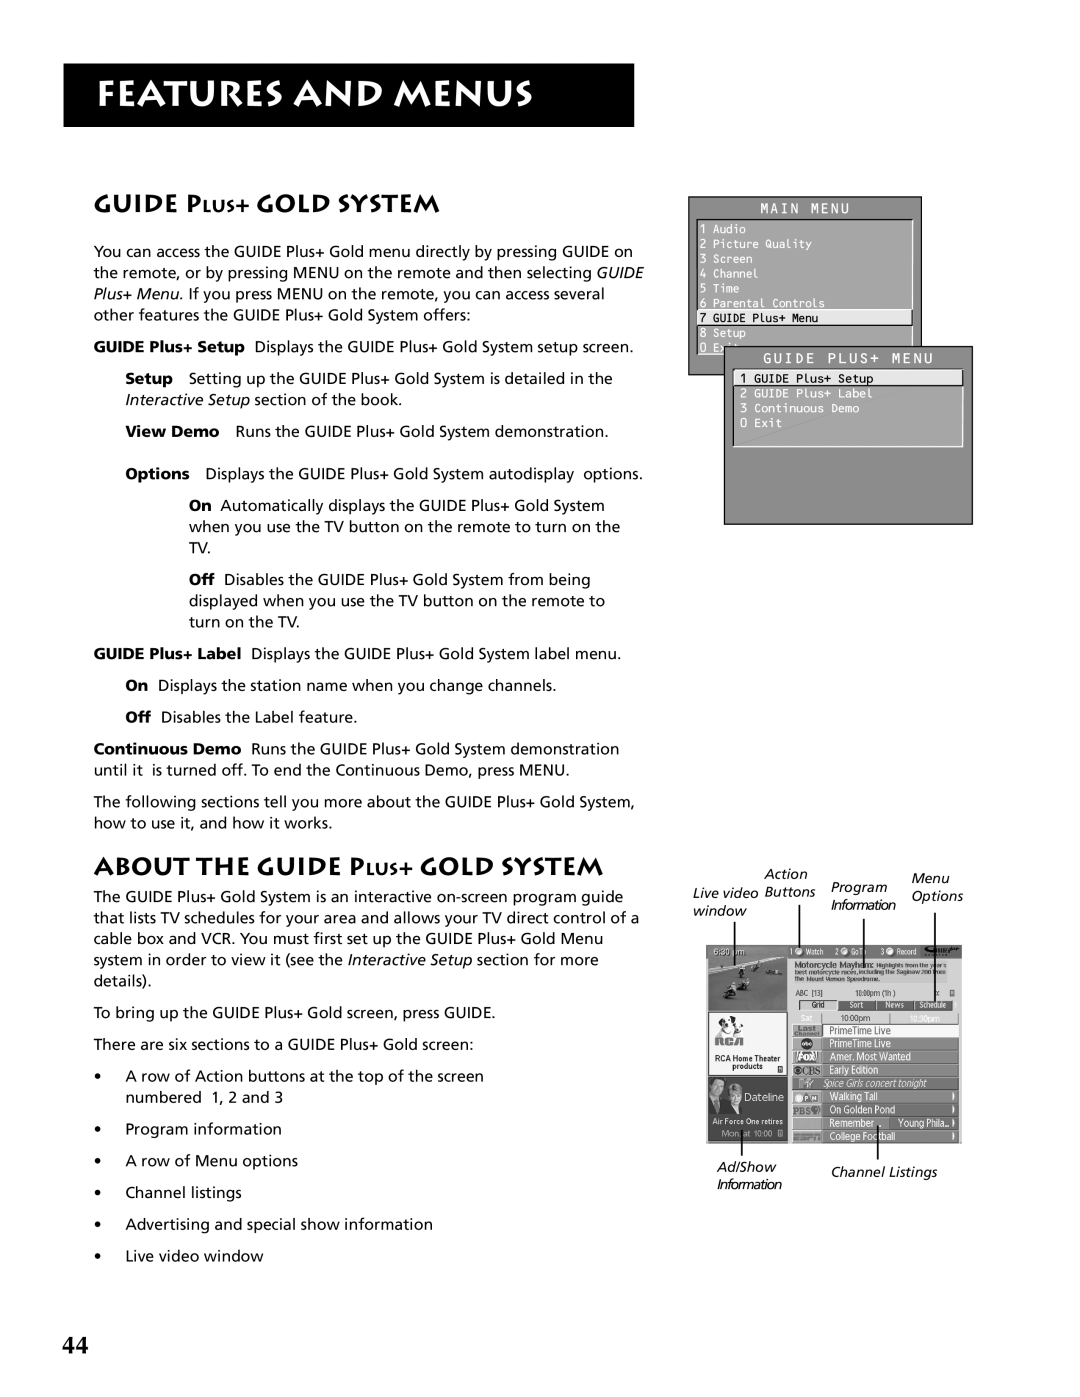 RCA F32691 manual About The Guide Plus+ Gold System, Features And Menus 